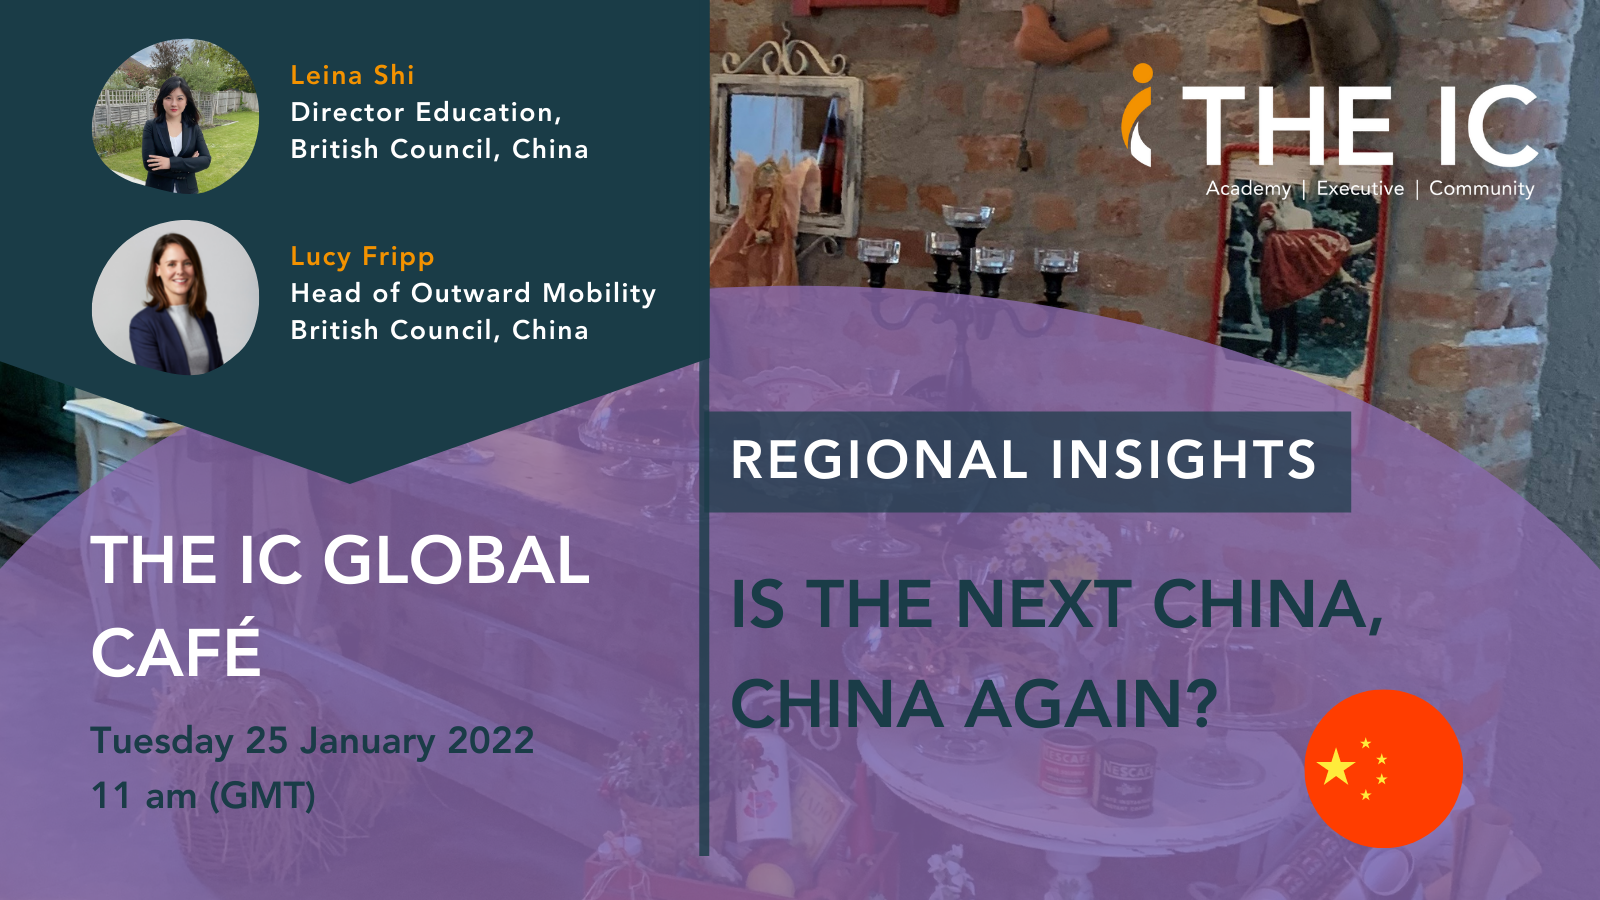 The IC Global Café: Is the Next China, China Again?